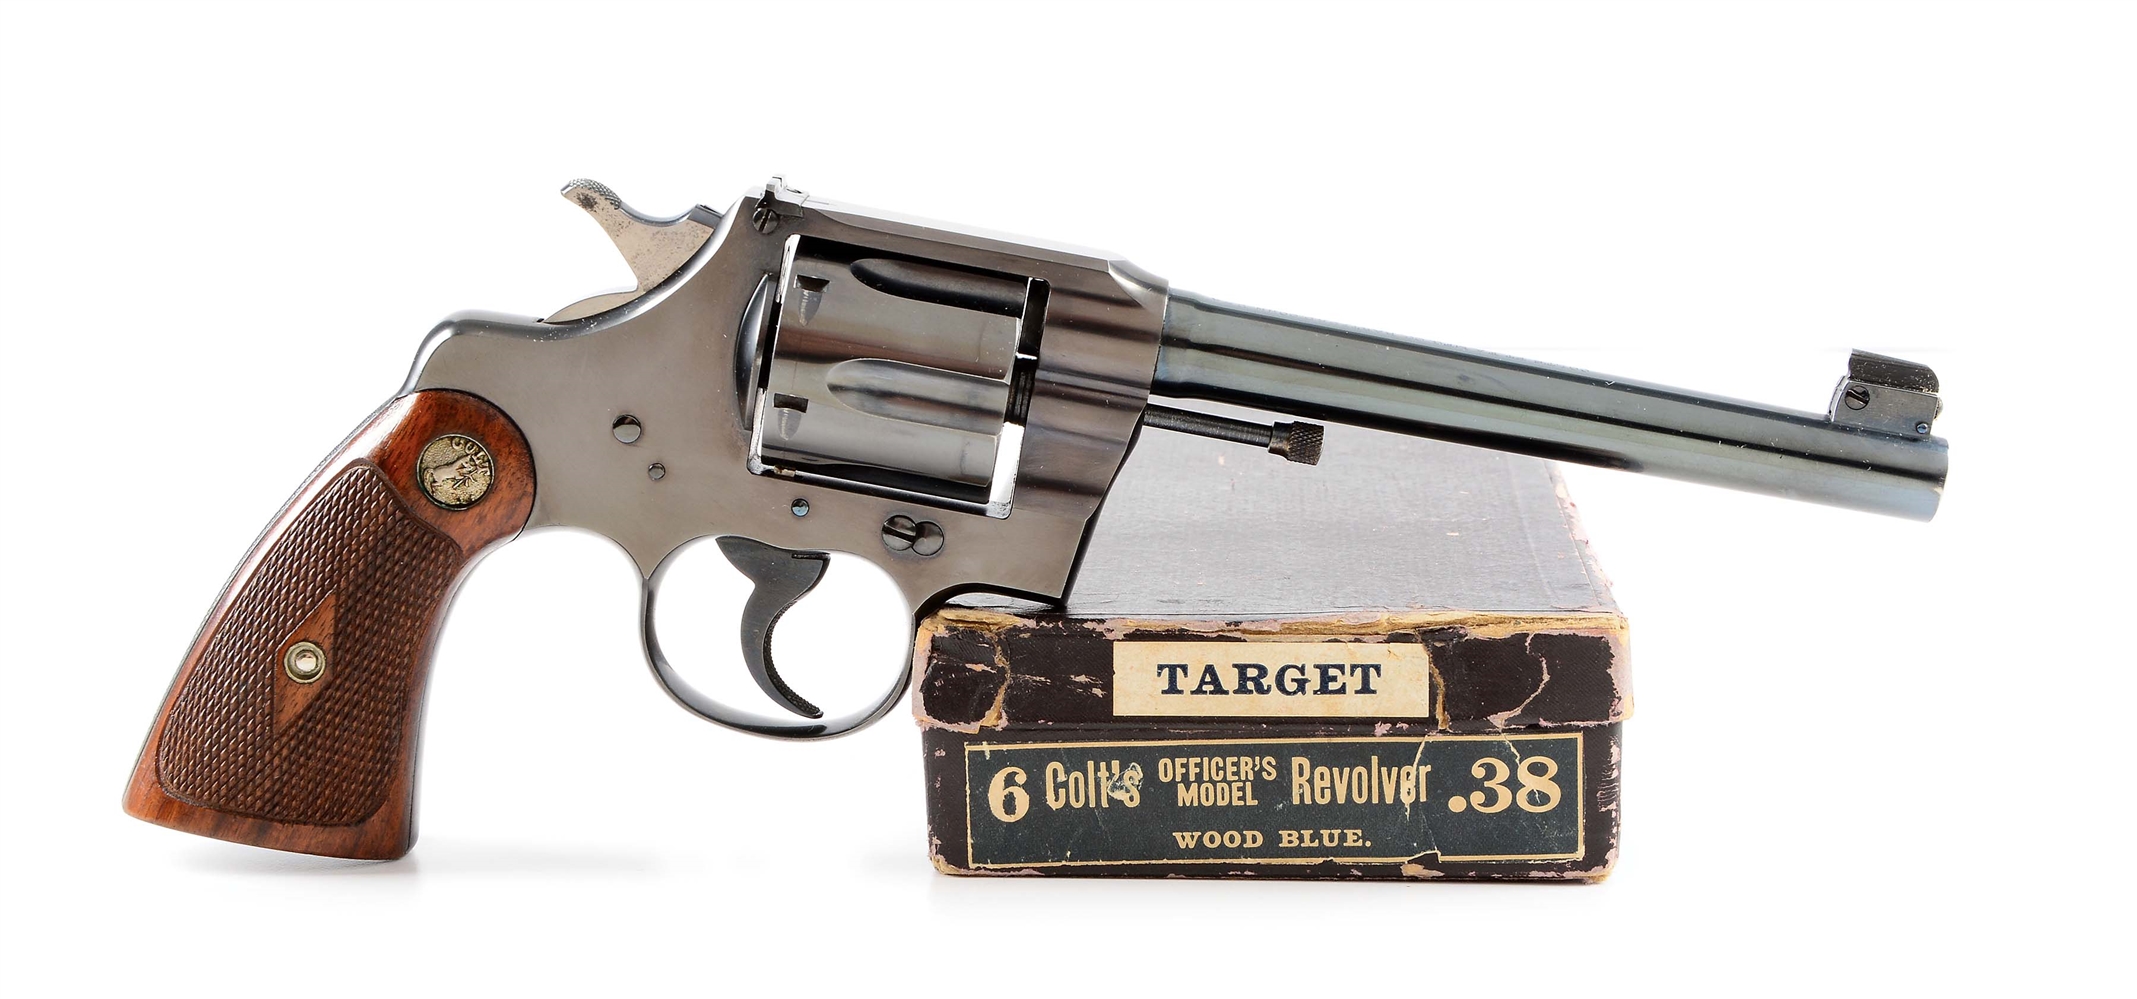 (C) BOXED PRE-WAR COLT OFFICERS MODEL DOUBLE ACTION TARGET REVOLVER (1920).